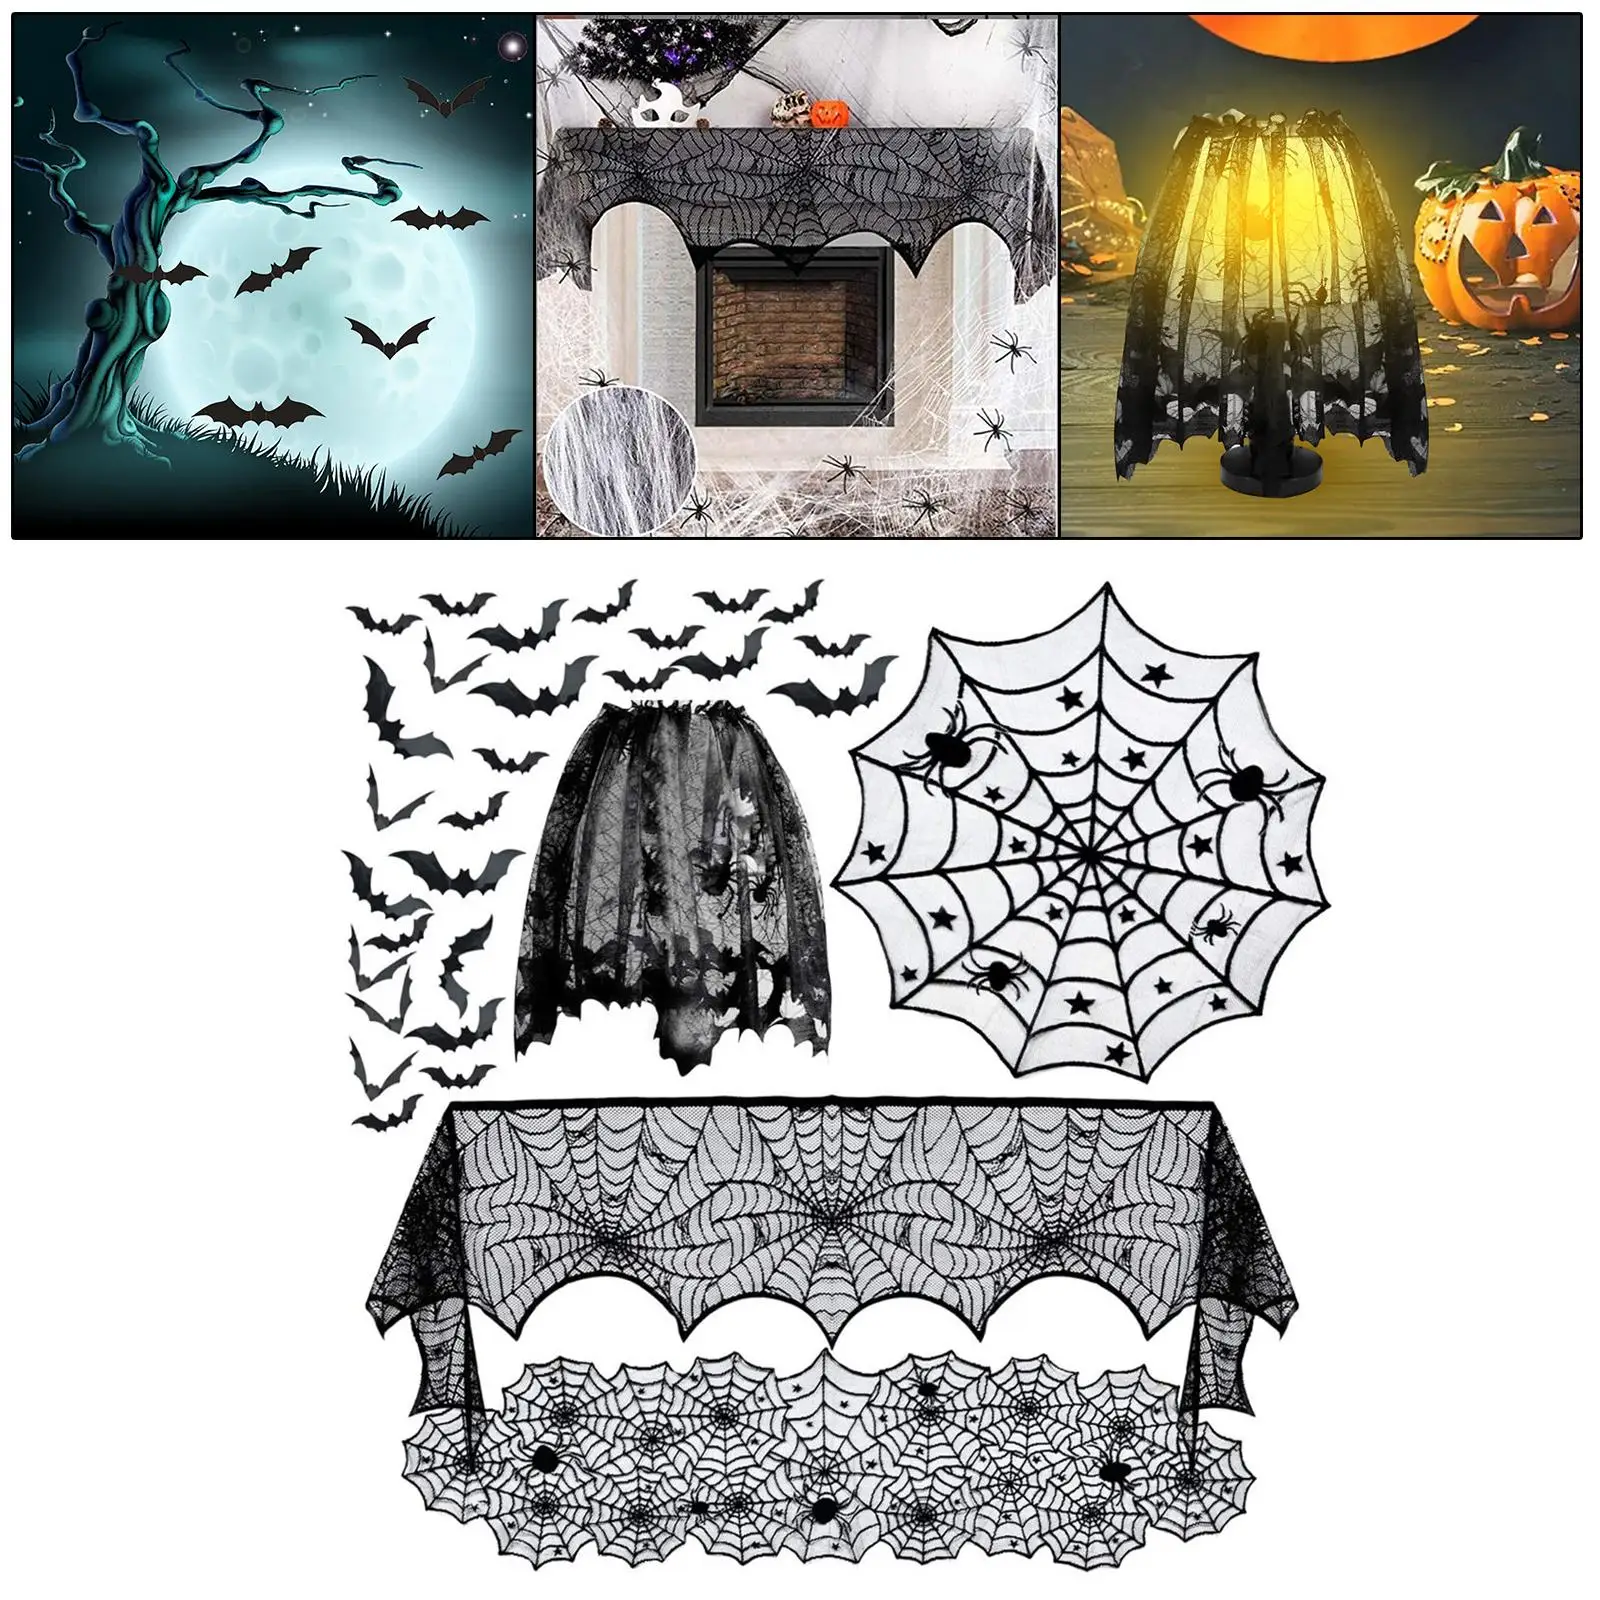 Halloween Tablecloth Decoration Set Cobweb Table Cover Fireplace Mantle Scarf with Scary Bat Gothic for Curtain Kitchen Indoor